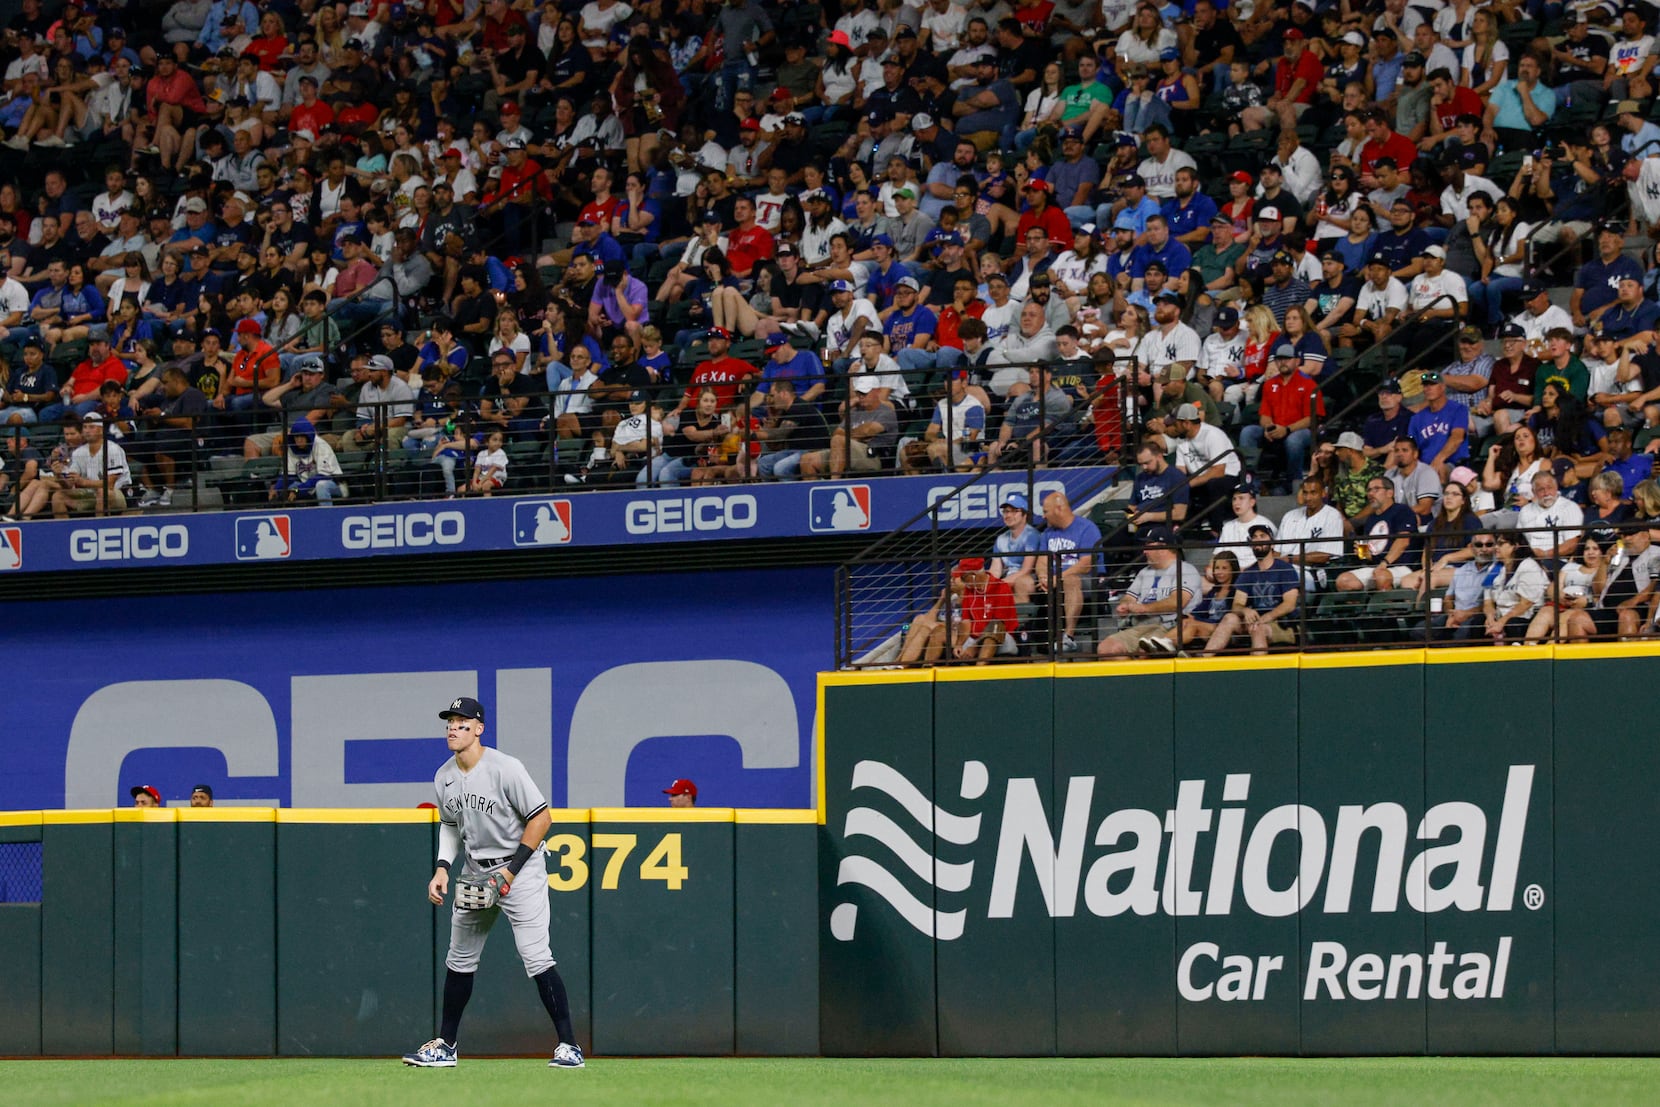 What should Rangers fans do if they catch Aaron Judge HR No. 62 in  Arlington?